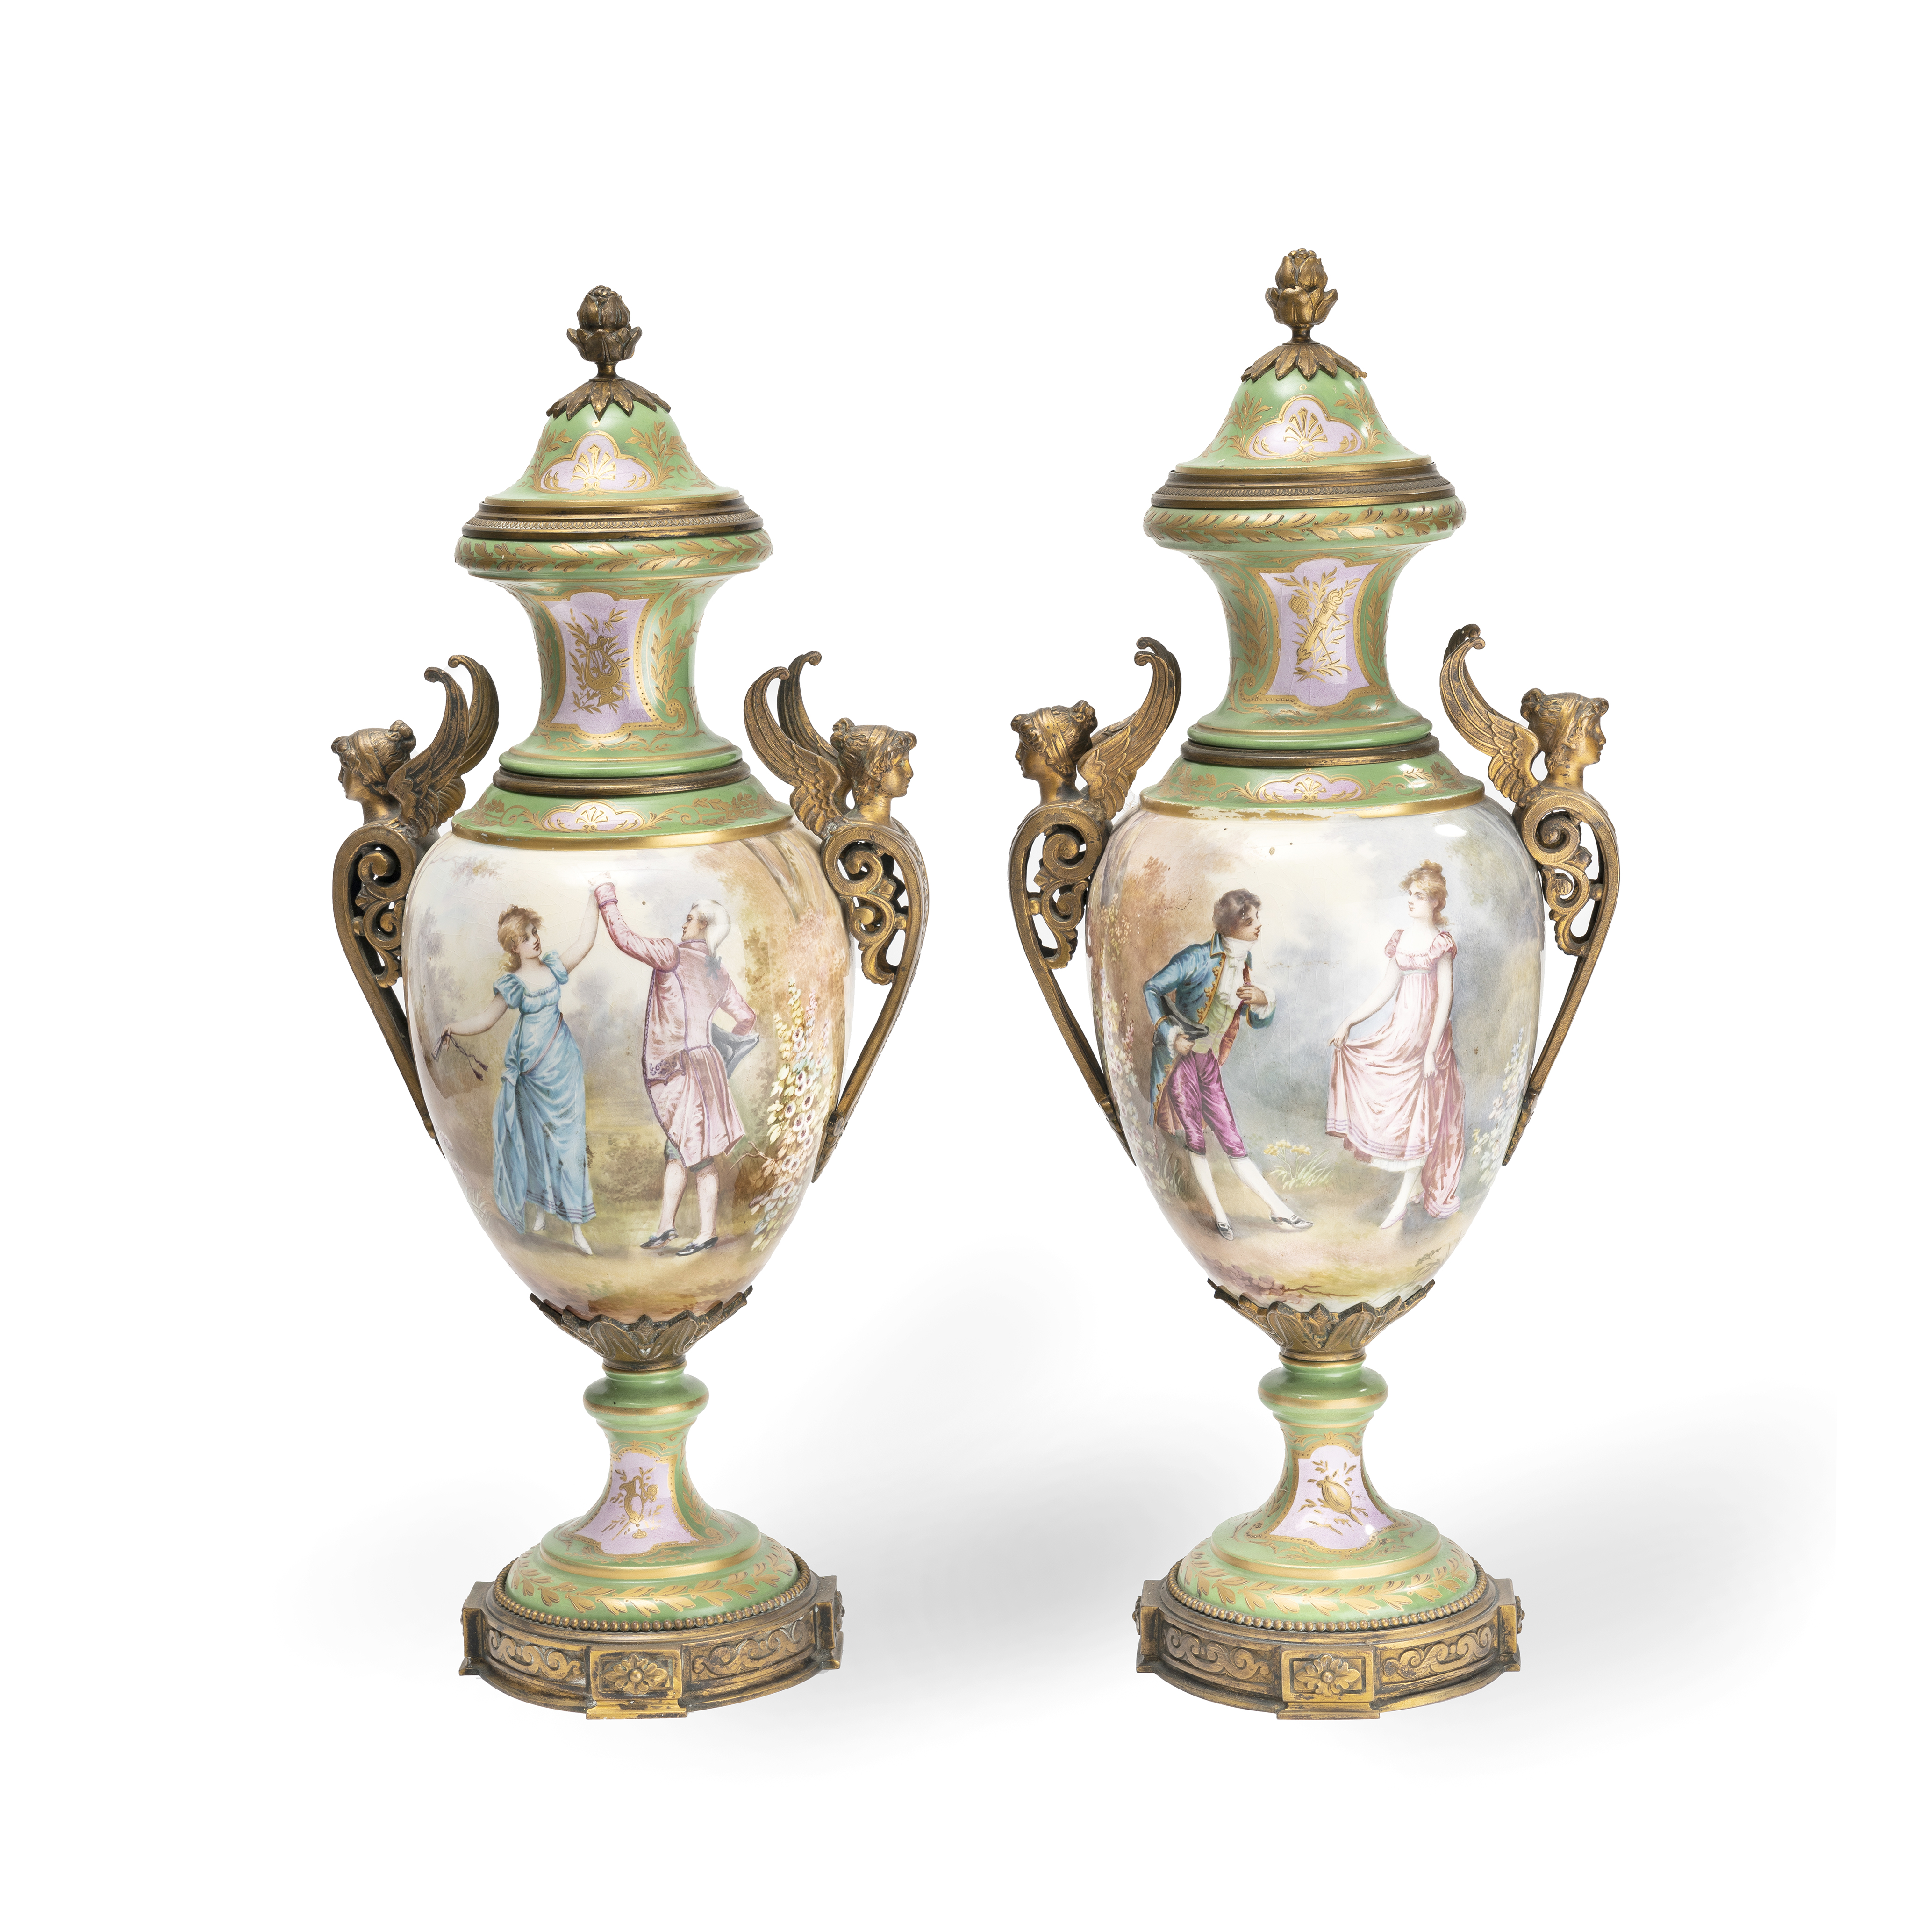 A pair of late 19th / early 20th century French gilt bronze mounted porcelain garniture vases an...